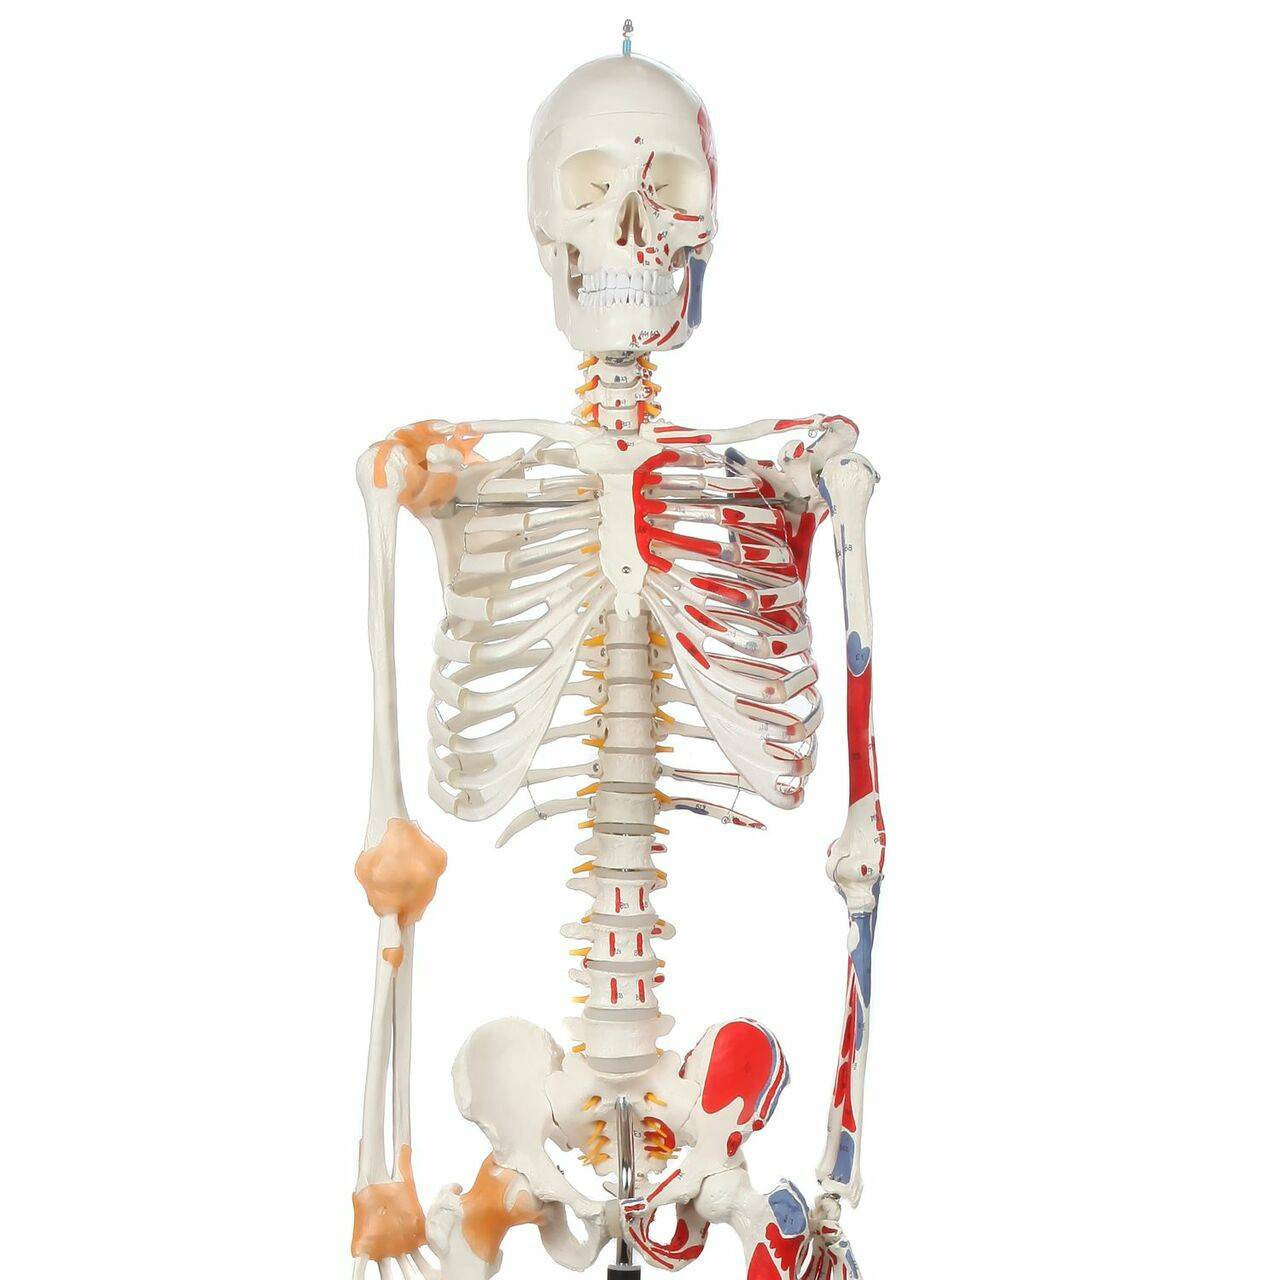 Flexible Human Hand Skeleton Model with Ligaments Anatomically Accurate Hand Skeleton Model Life Size Human Skeleton Anatomy For Science Classroom Study Display Teaching Medical Model 